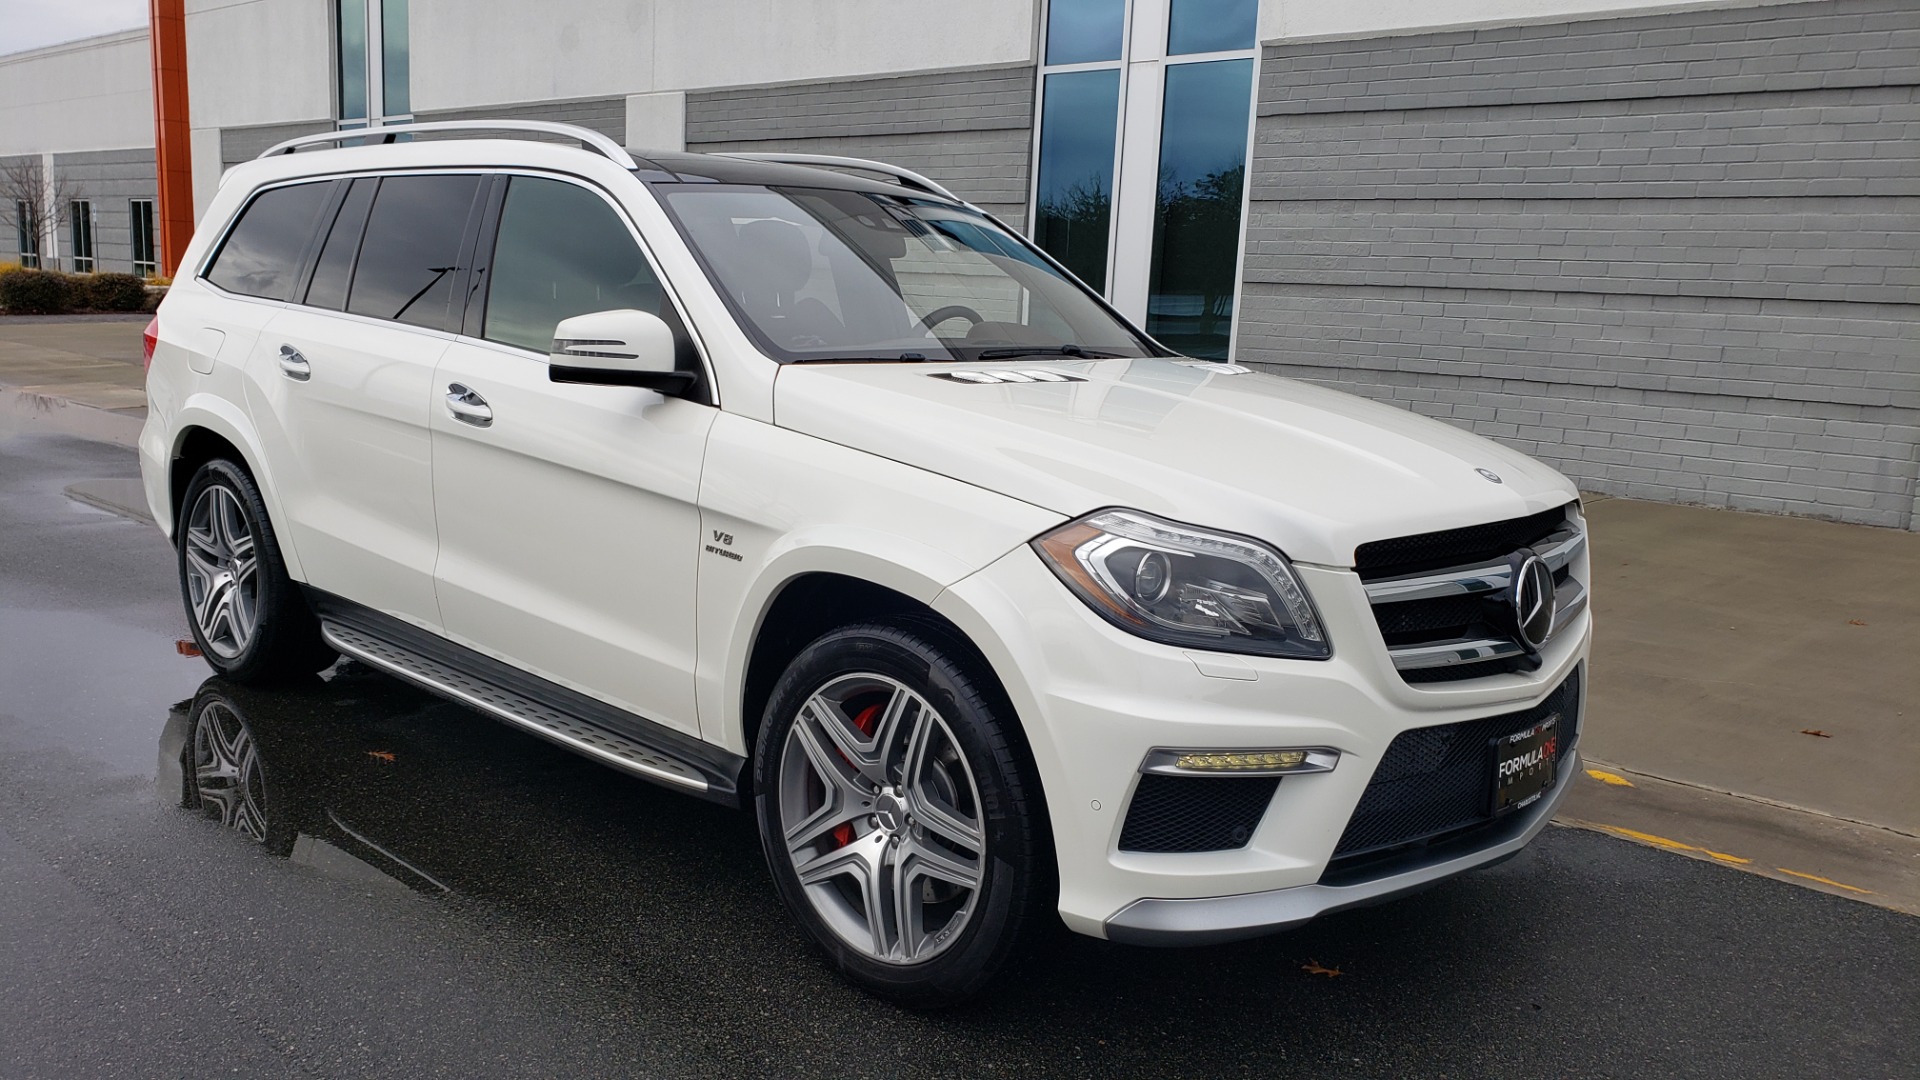 Used 2014 Mercedes-Benz GL-CLASS GL 63 AMG 4MATIC / NIGHT VIEW ASSIST PLUS / BANG & OLUFSEN SND for sale Sold at Formula Imports in Charlotte NC 28227 6